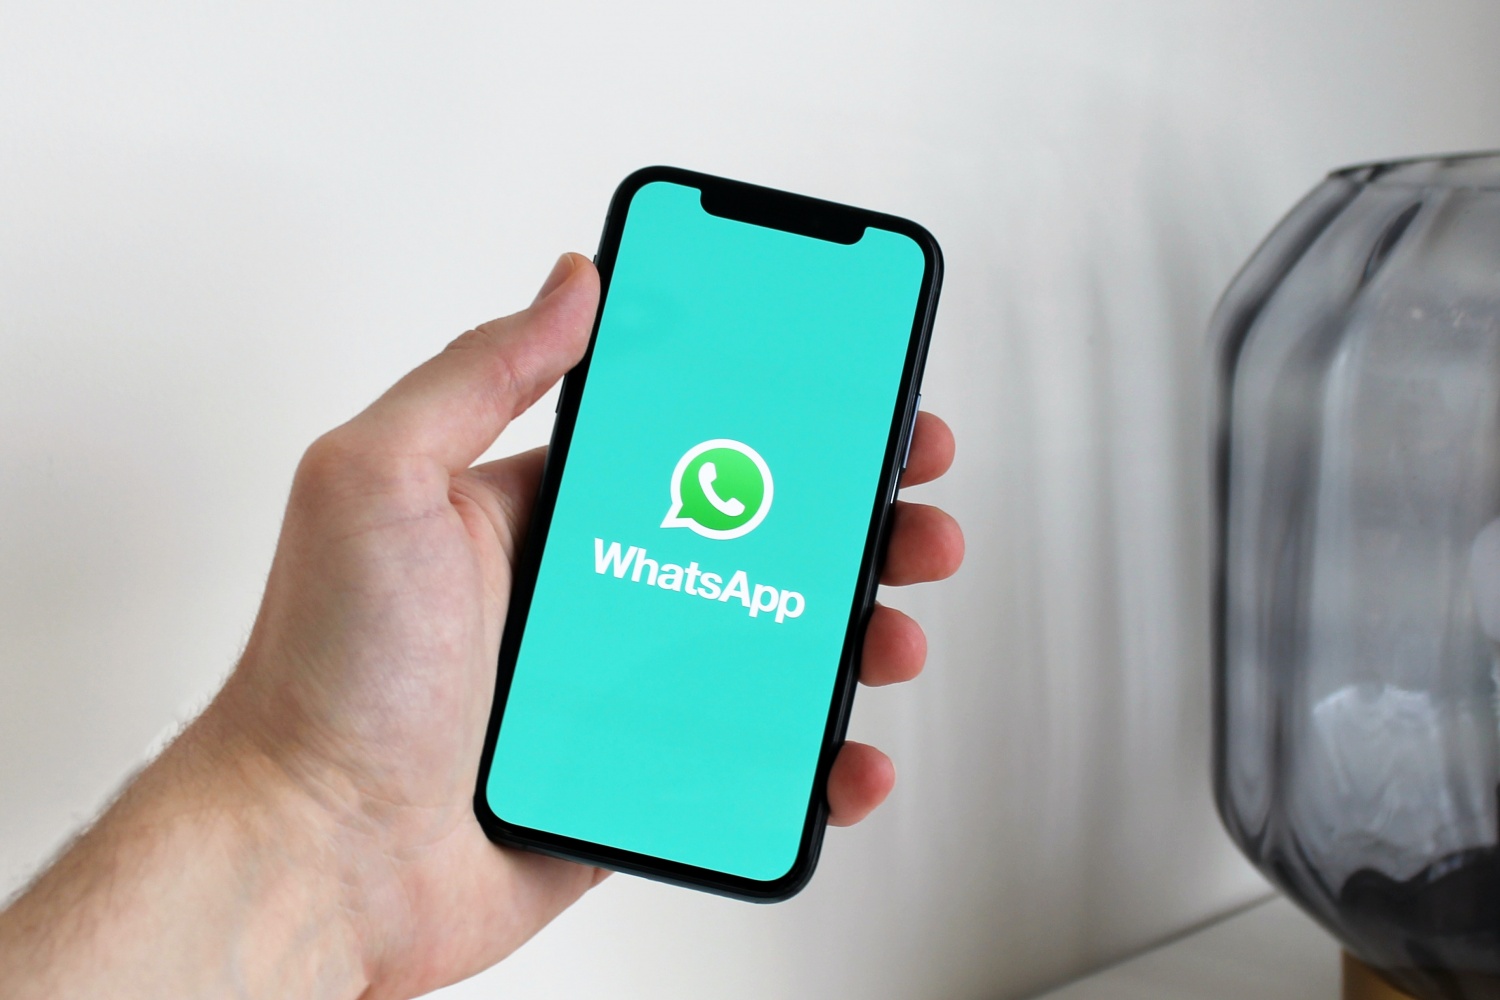 WhatsApp new feature disappearing videos and photos